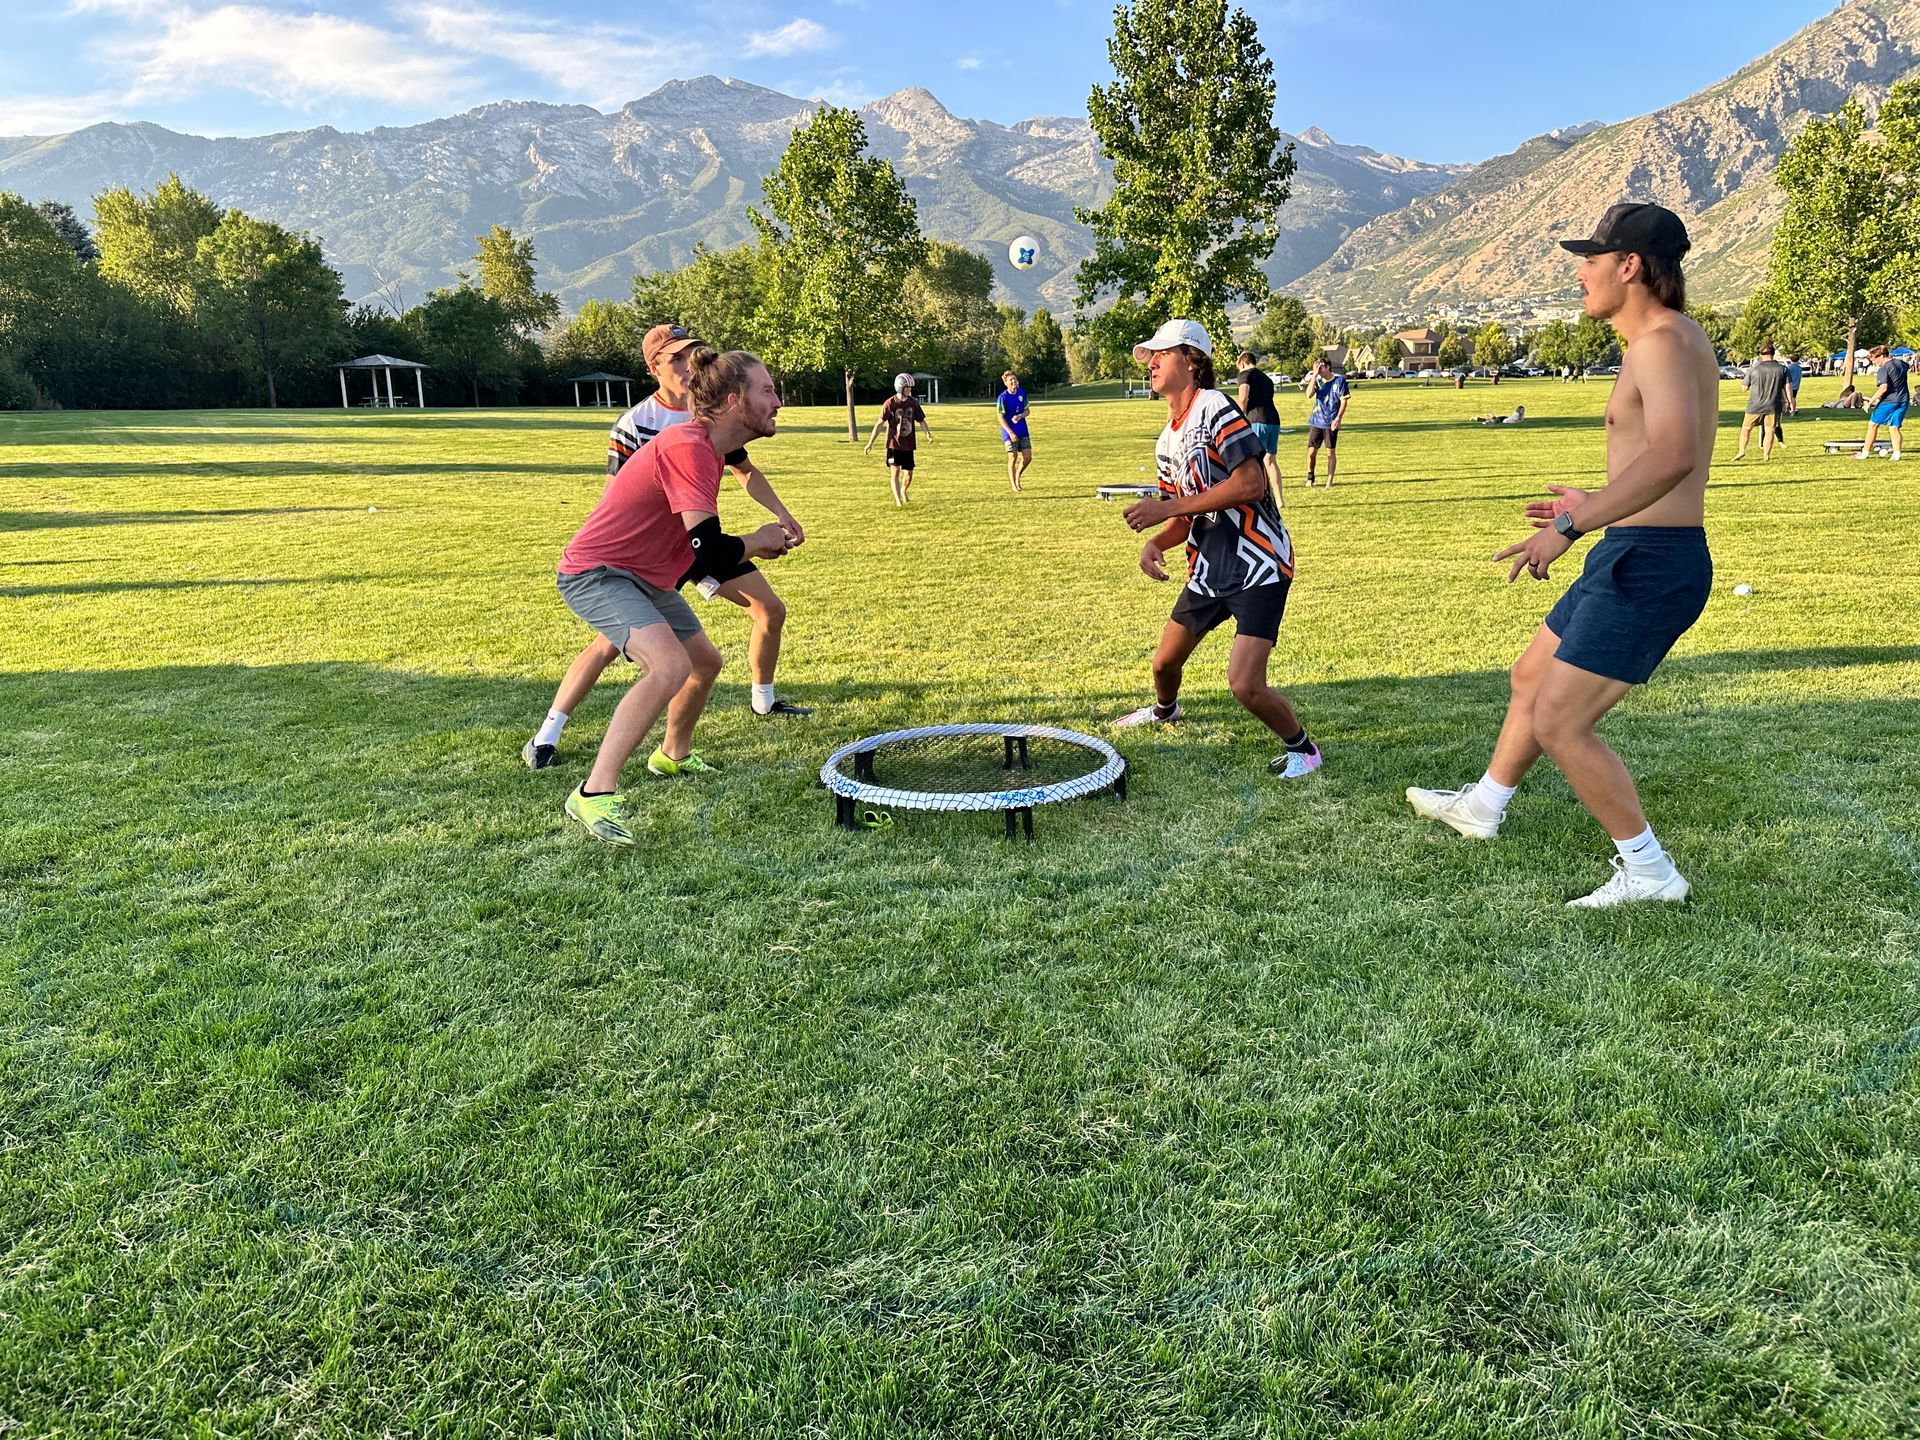 playing in a spikeball tournament in utah on a premier spike set.